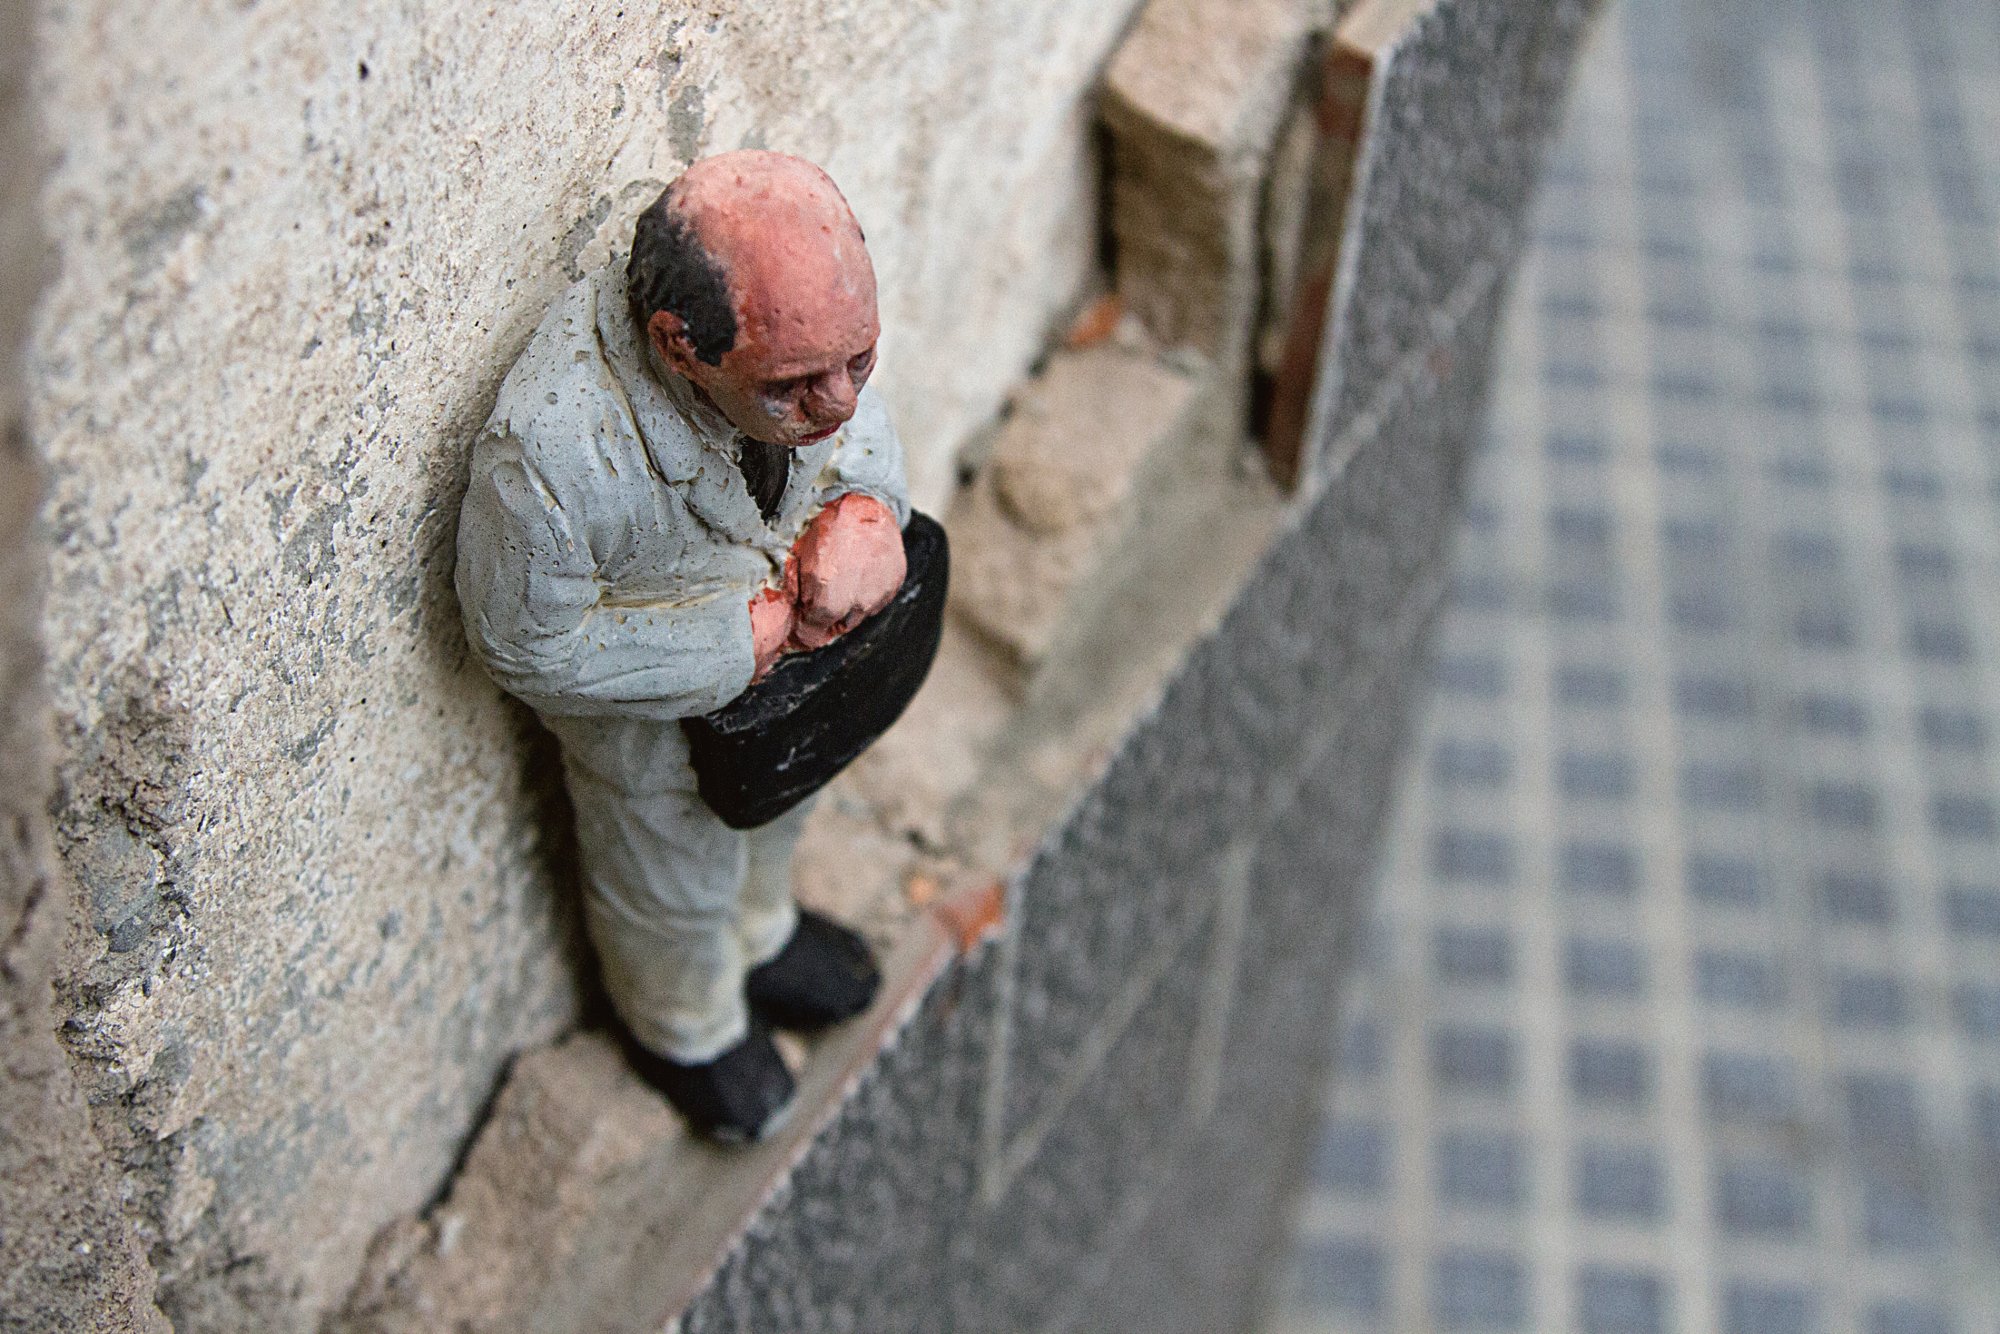 "Trapped in a Life Time", Málaga, Spanien, 2012, bemalter Zement von Isaac Cordal | S. 24 © Isaac Cordal / Street Art Reloaded, Prestel 2015